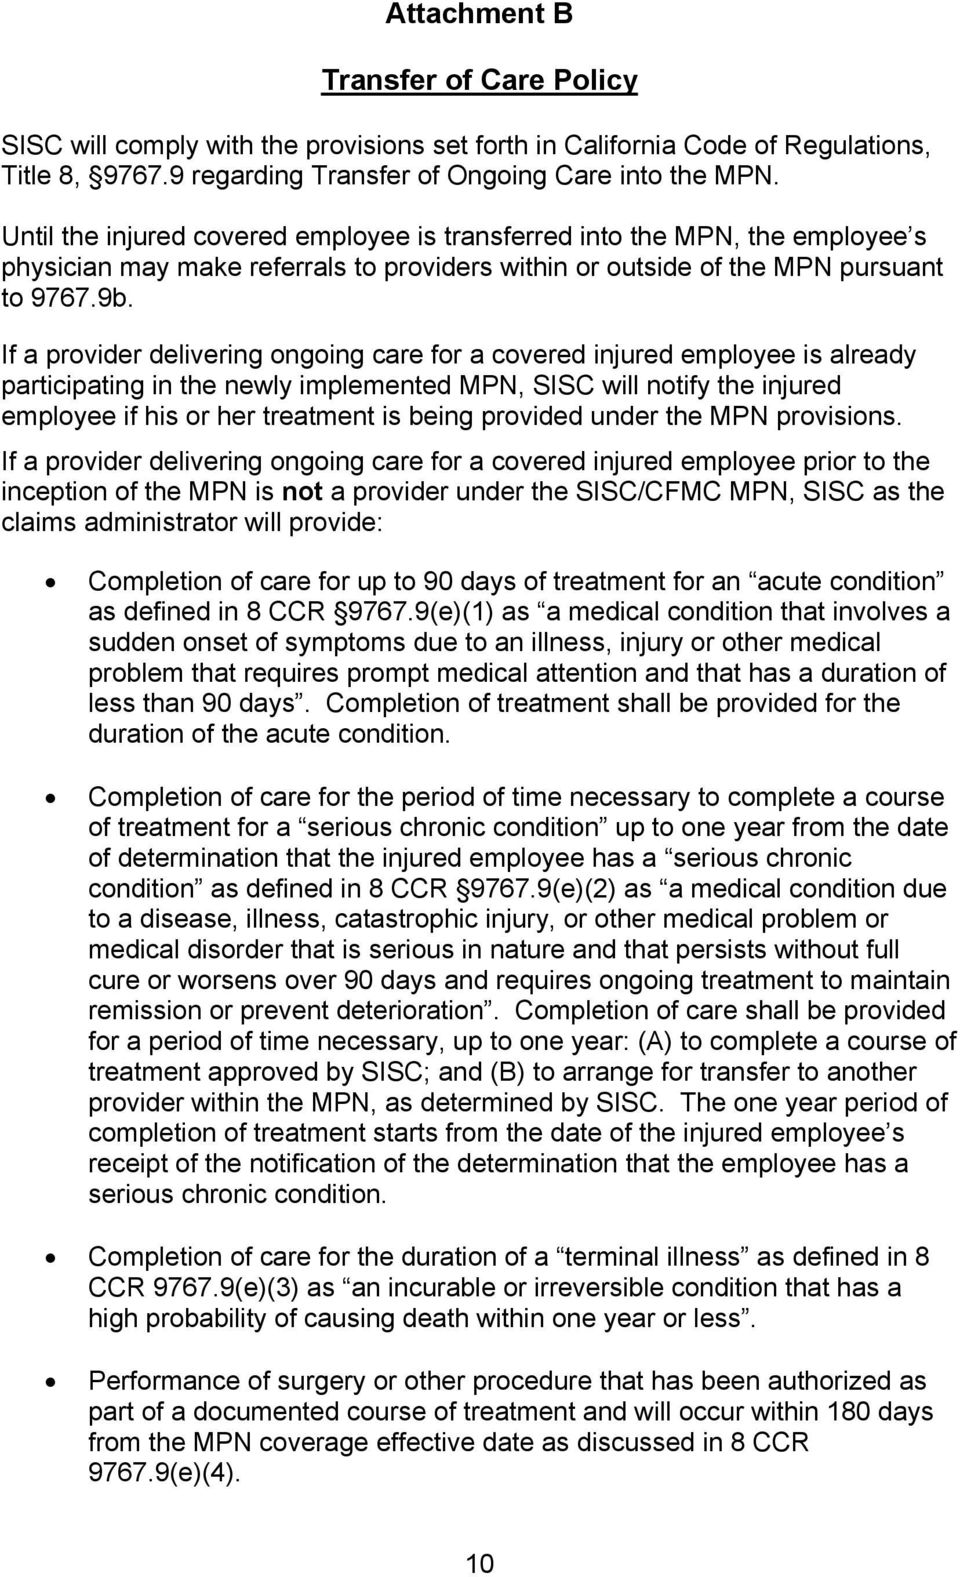 If a provider delivering ongoing care for a covered injured employee is already participating in the newly implemented MPN, SISC will notify the injured employee if his or her treatment is being